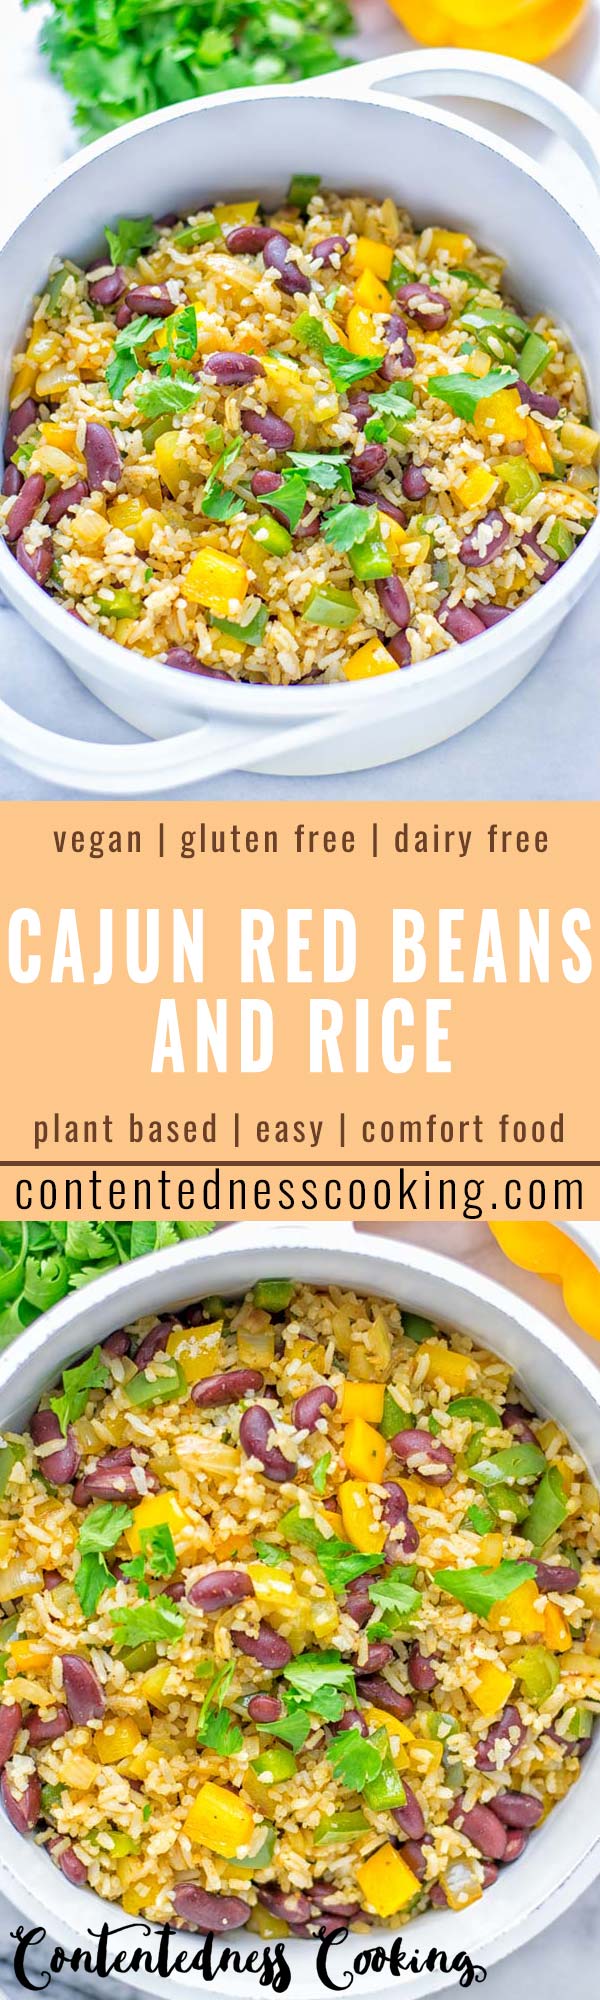 Cajun Red Beans and Rice - Contentedness Cooking